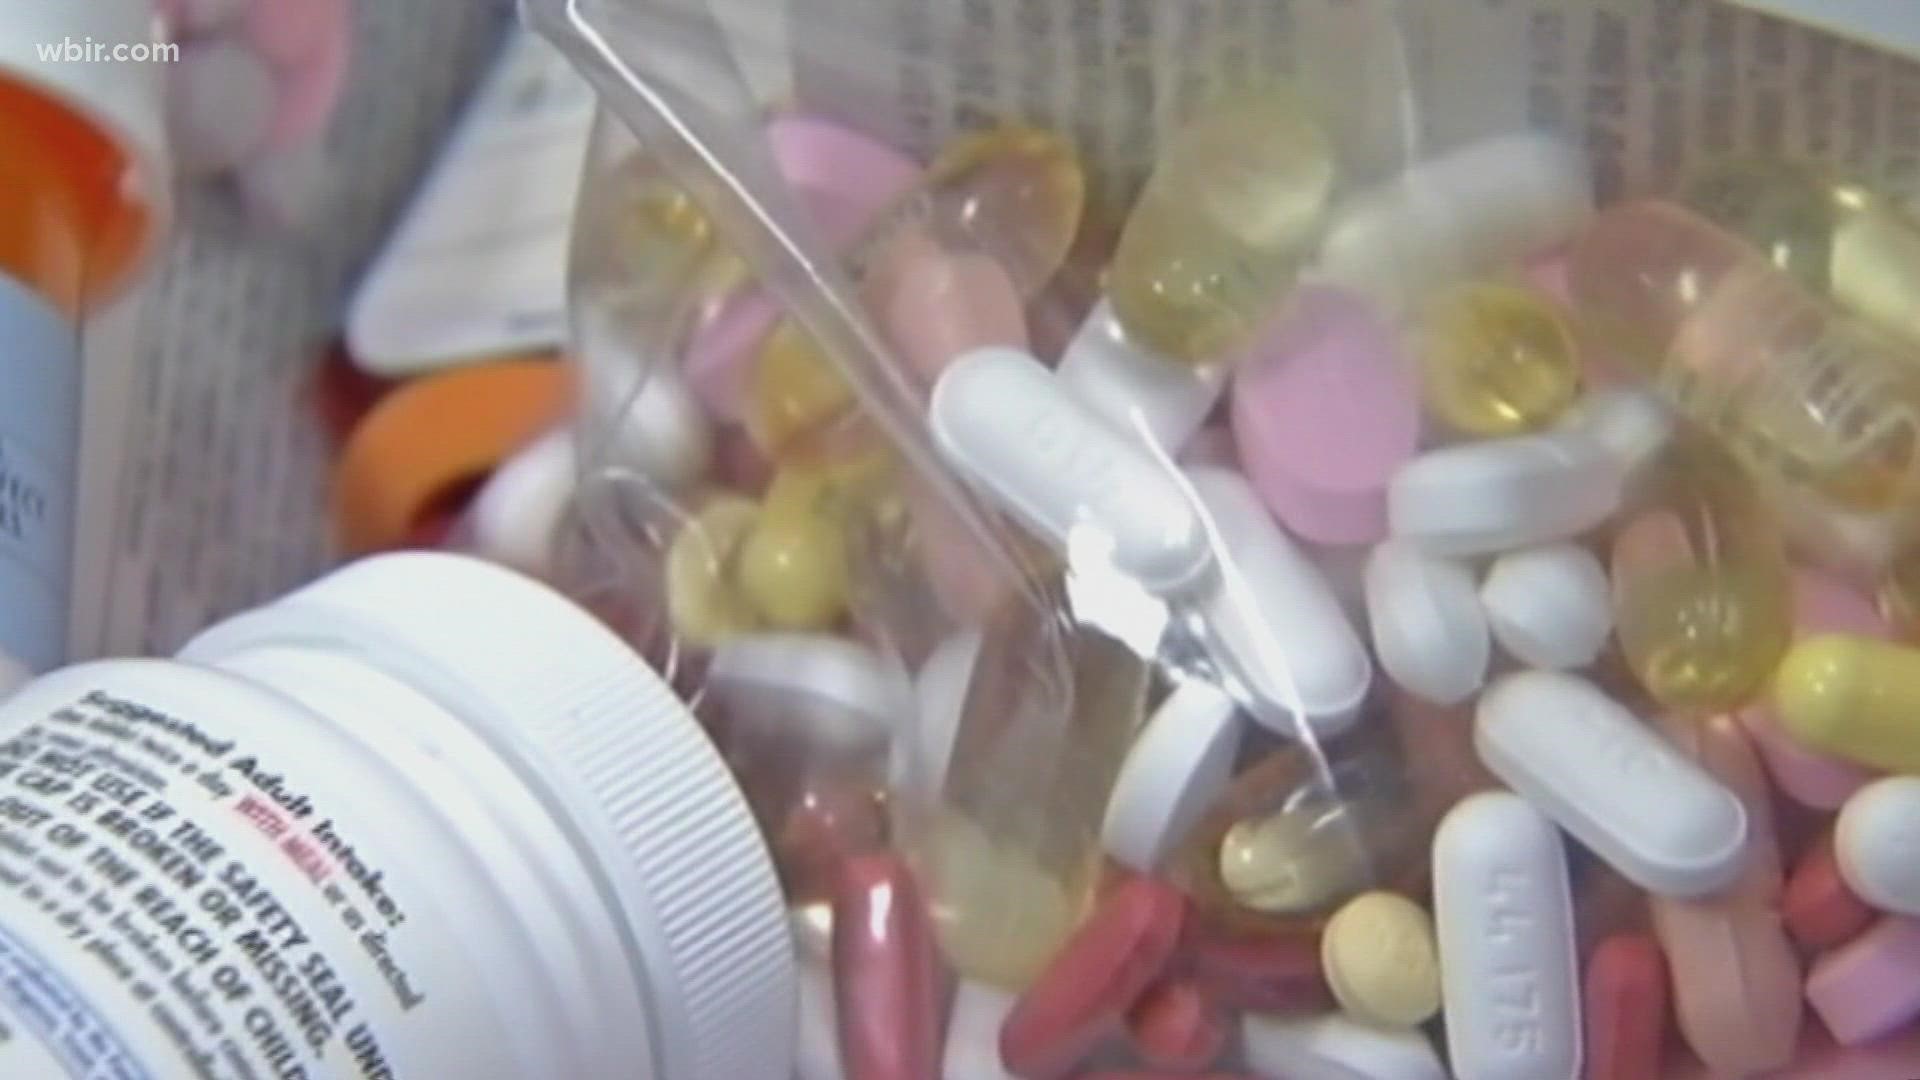 So far this year, the DEA seized counterfeit drugs in every state totaling over 9 million pills.